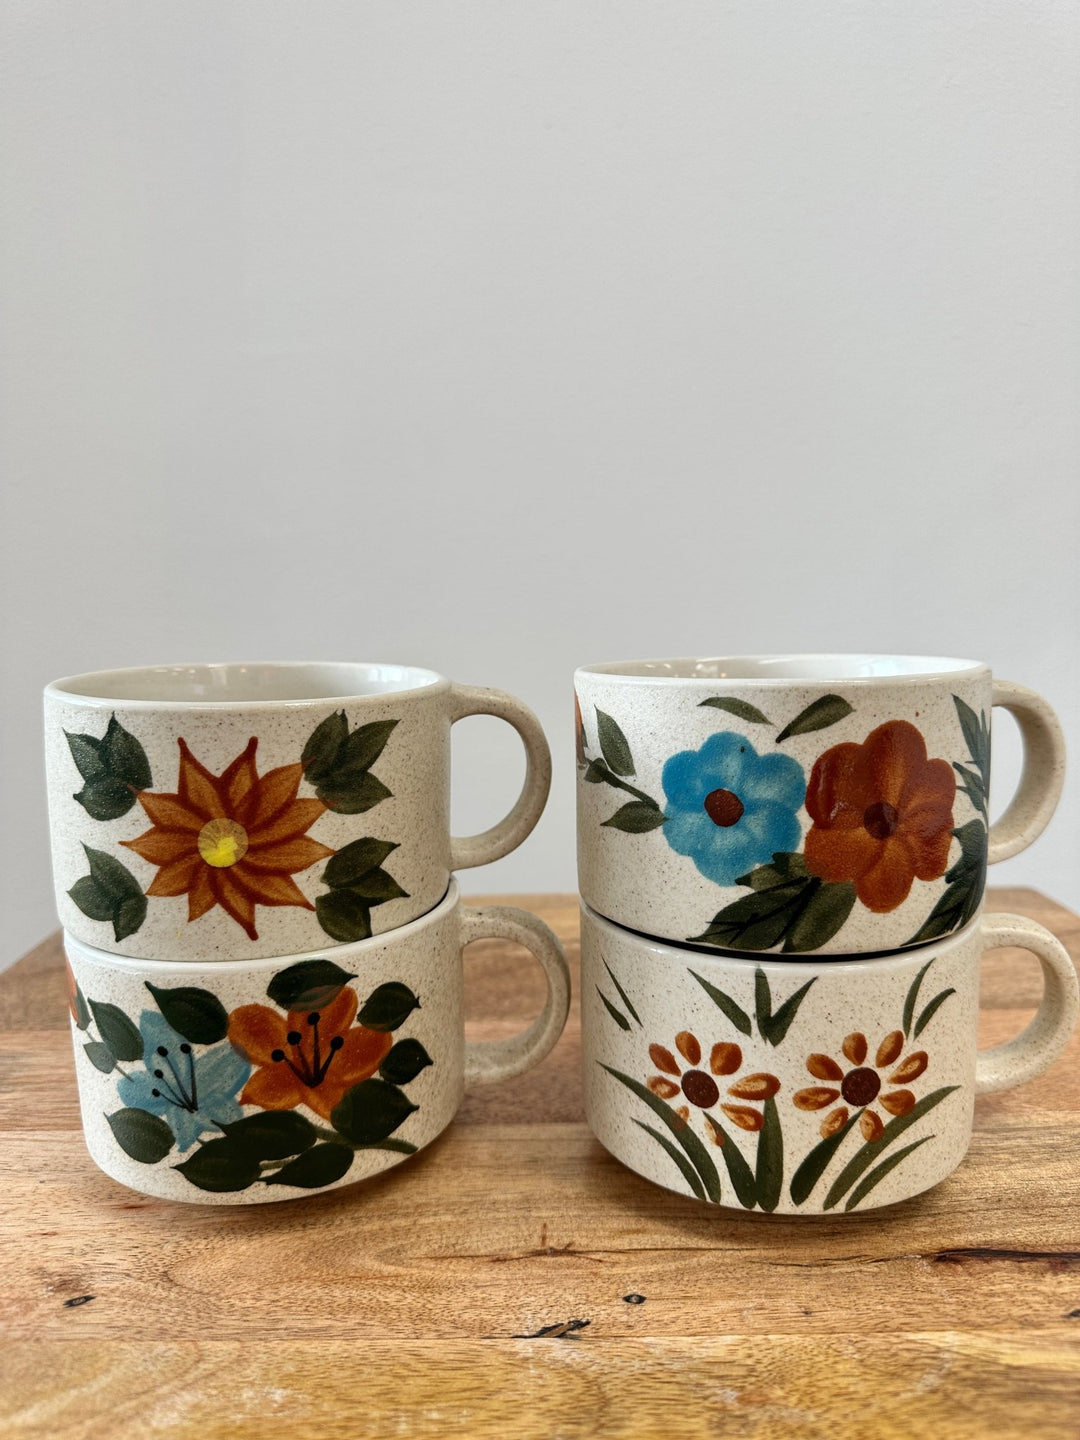 Set of 4 Handpainted Vintage Soup Mugs LOCAL PICK UP - Pretty by Her- handmade locally in Cambridge, Ontario